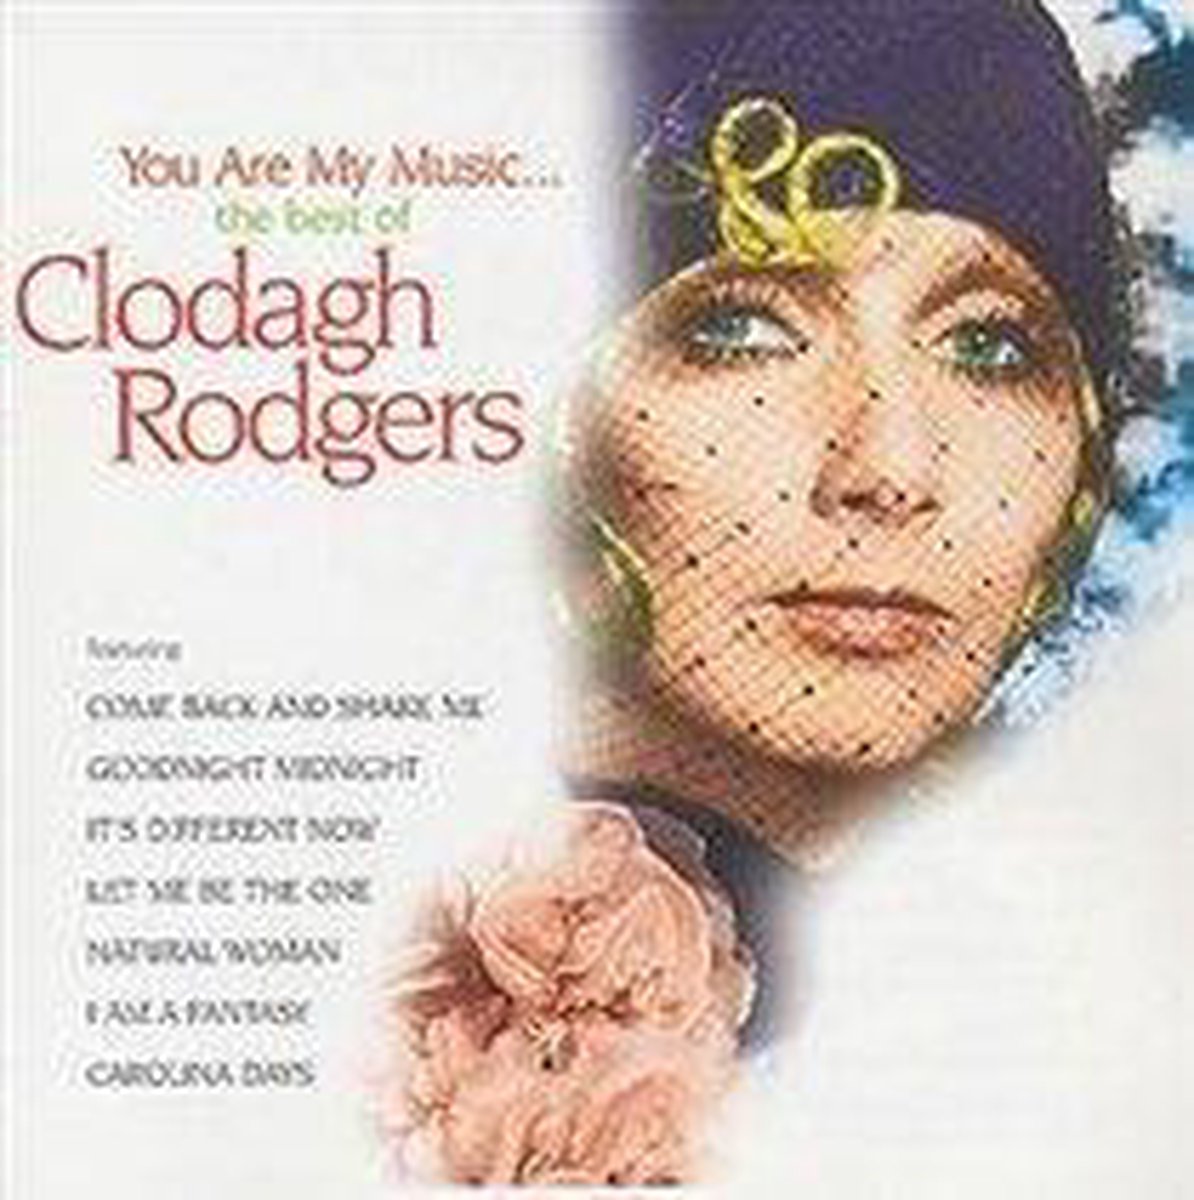 You Are My Music: Best Of Clodagh Rodgers - Clodagh Rodgers